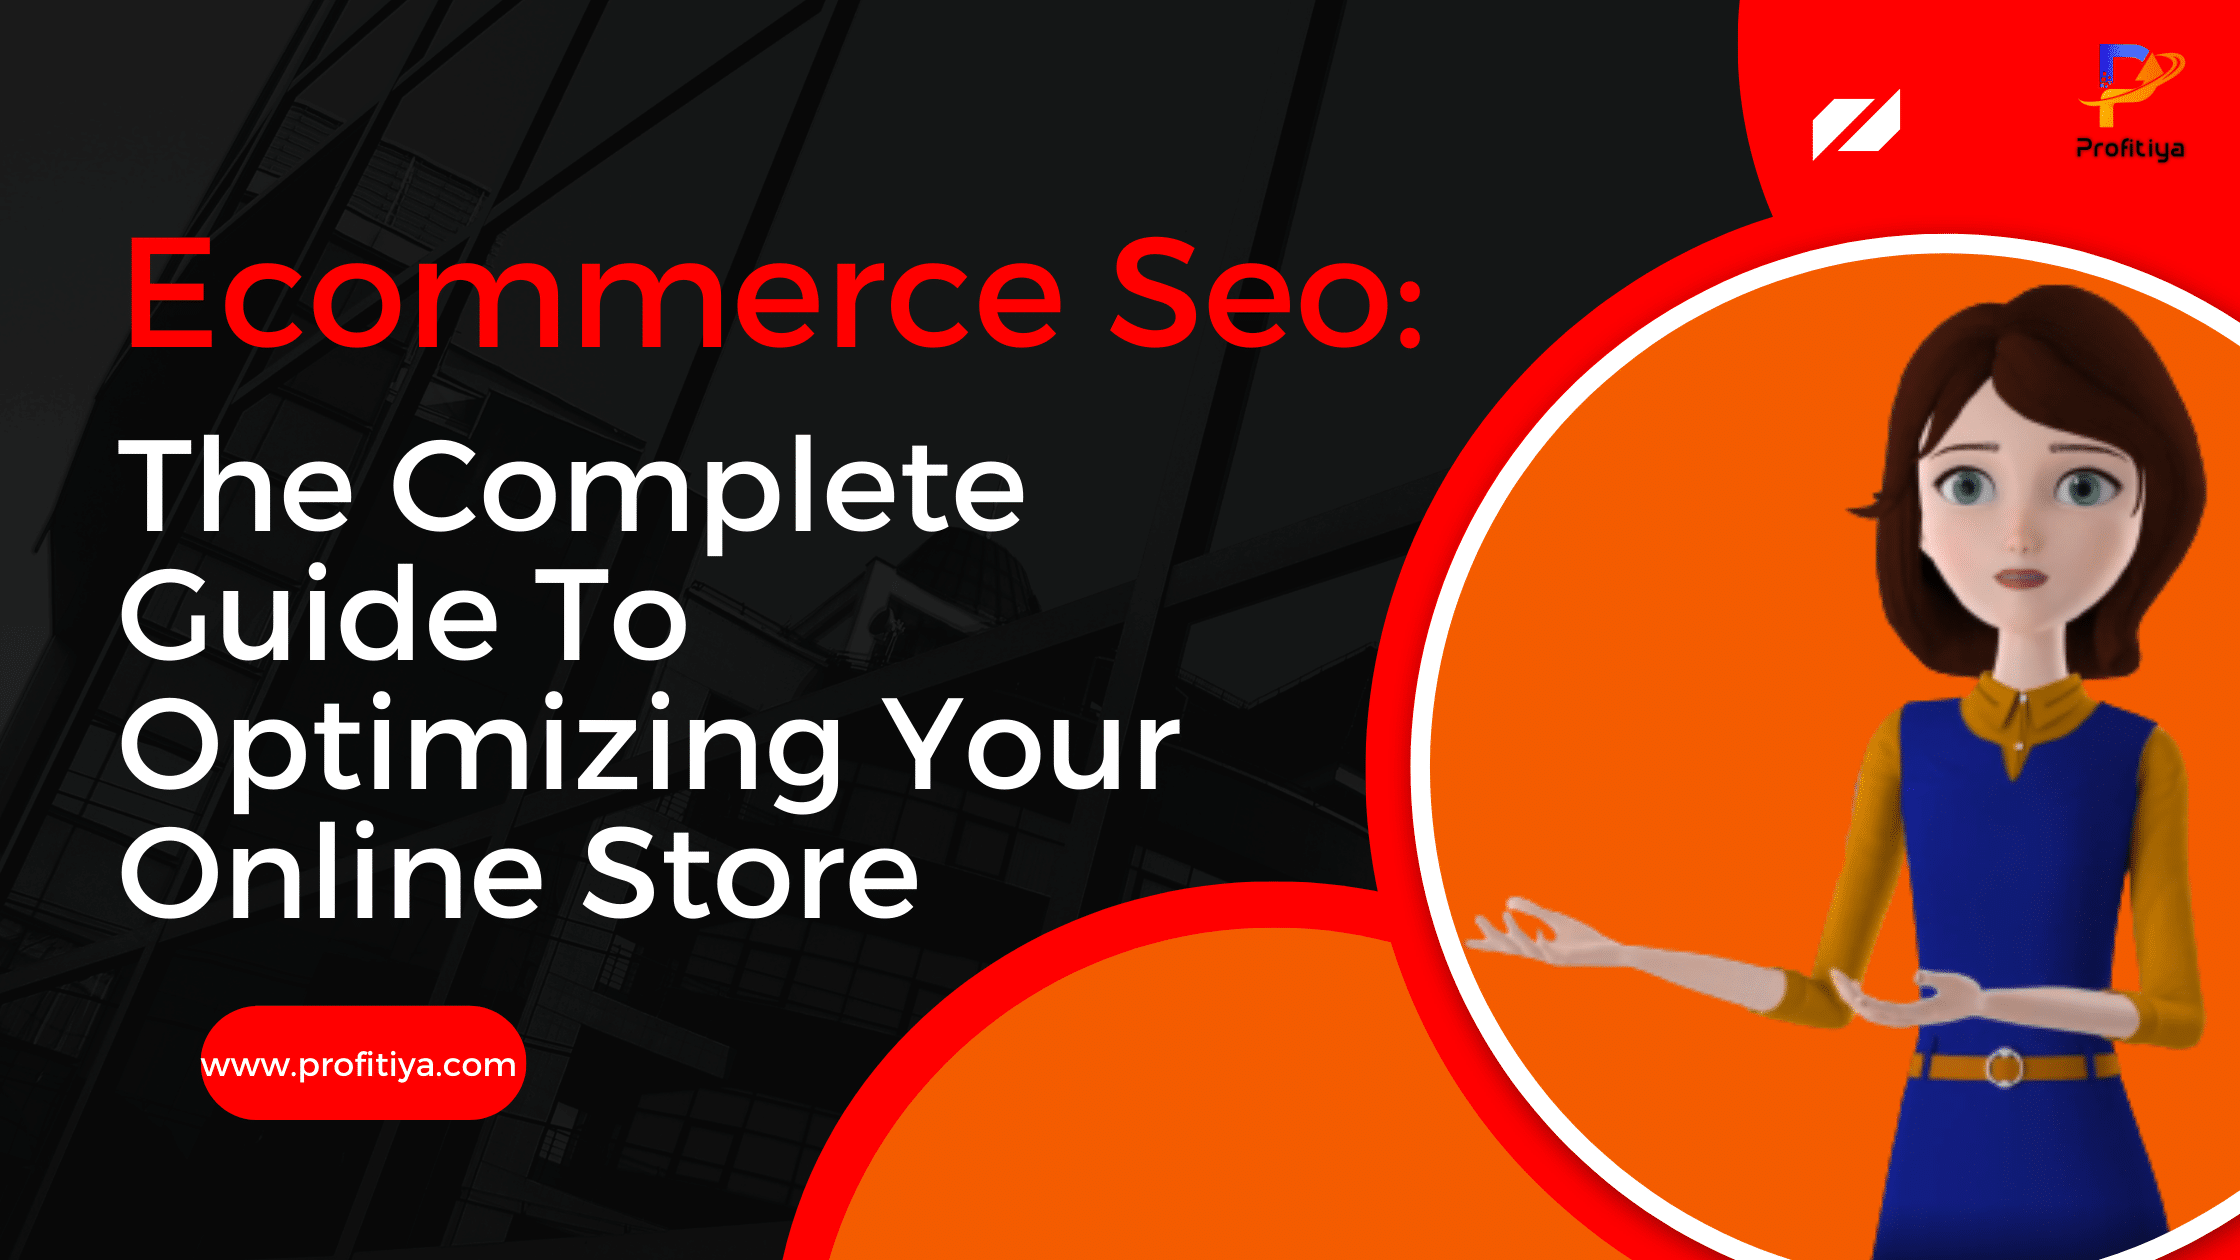 Ecommerce Seo: The Complete Guide To Optimizing Your Online Store